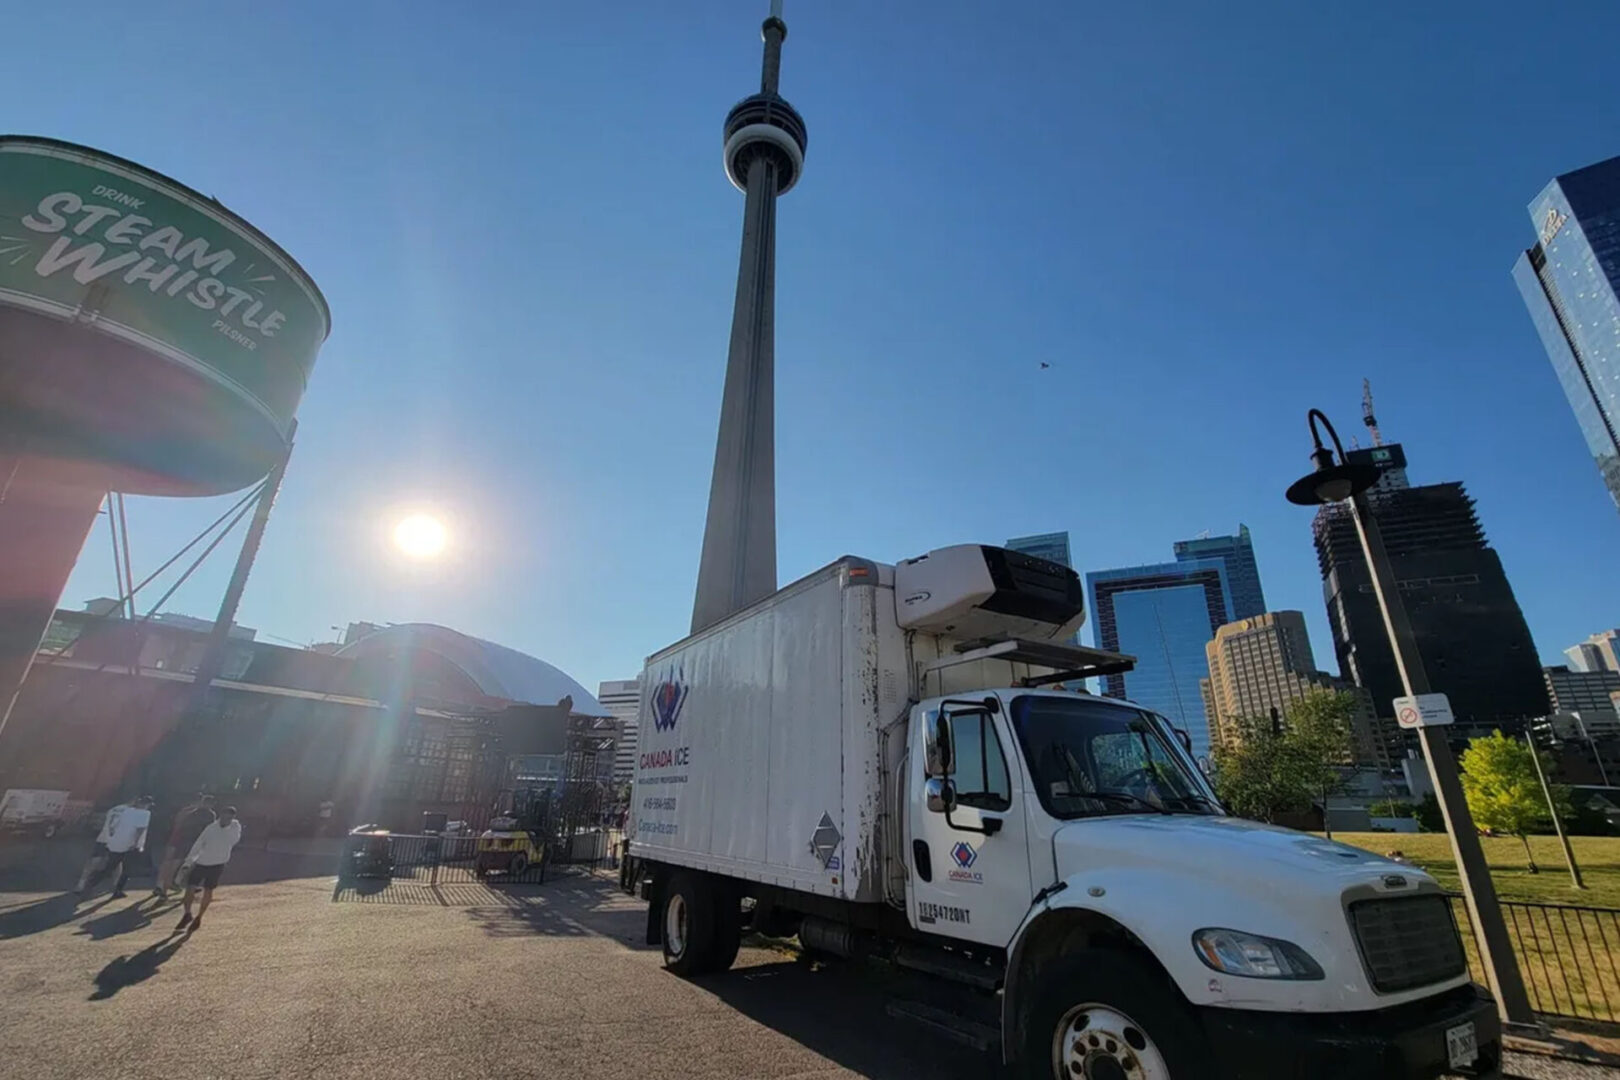 A white truck parked in front of the cn tower.